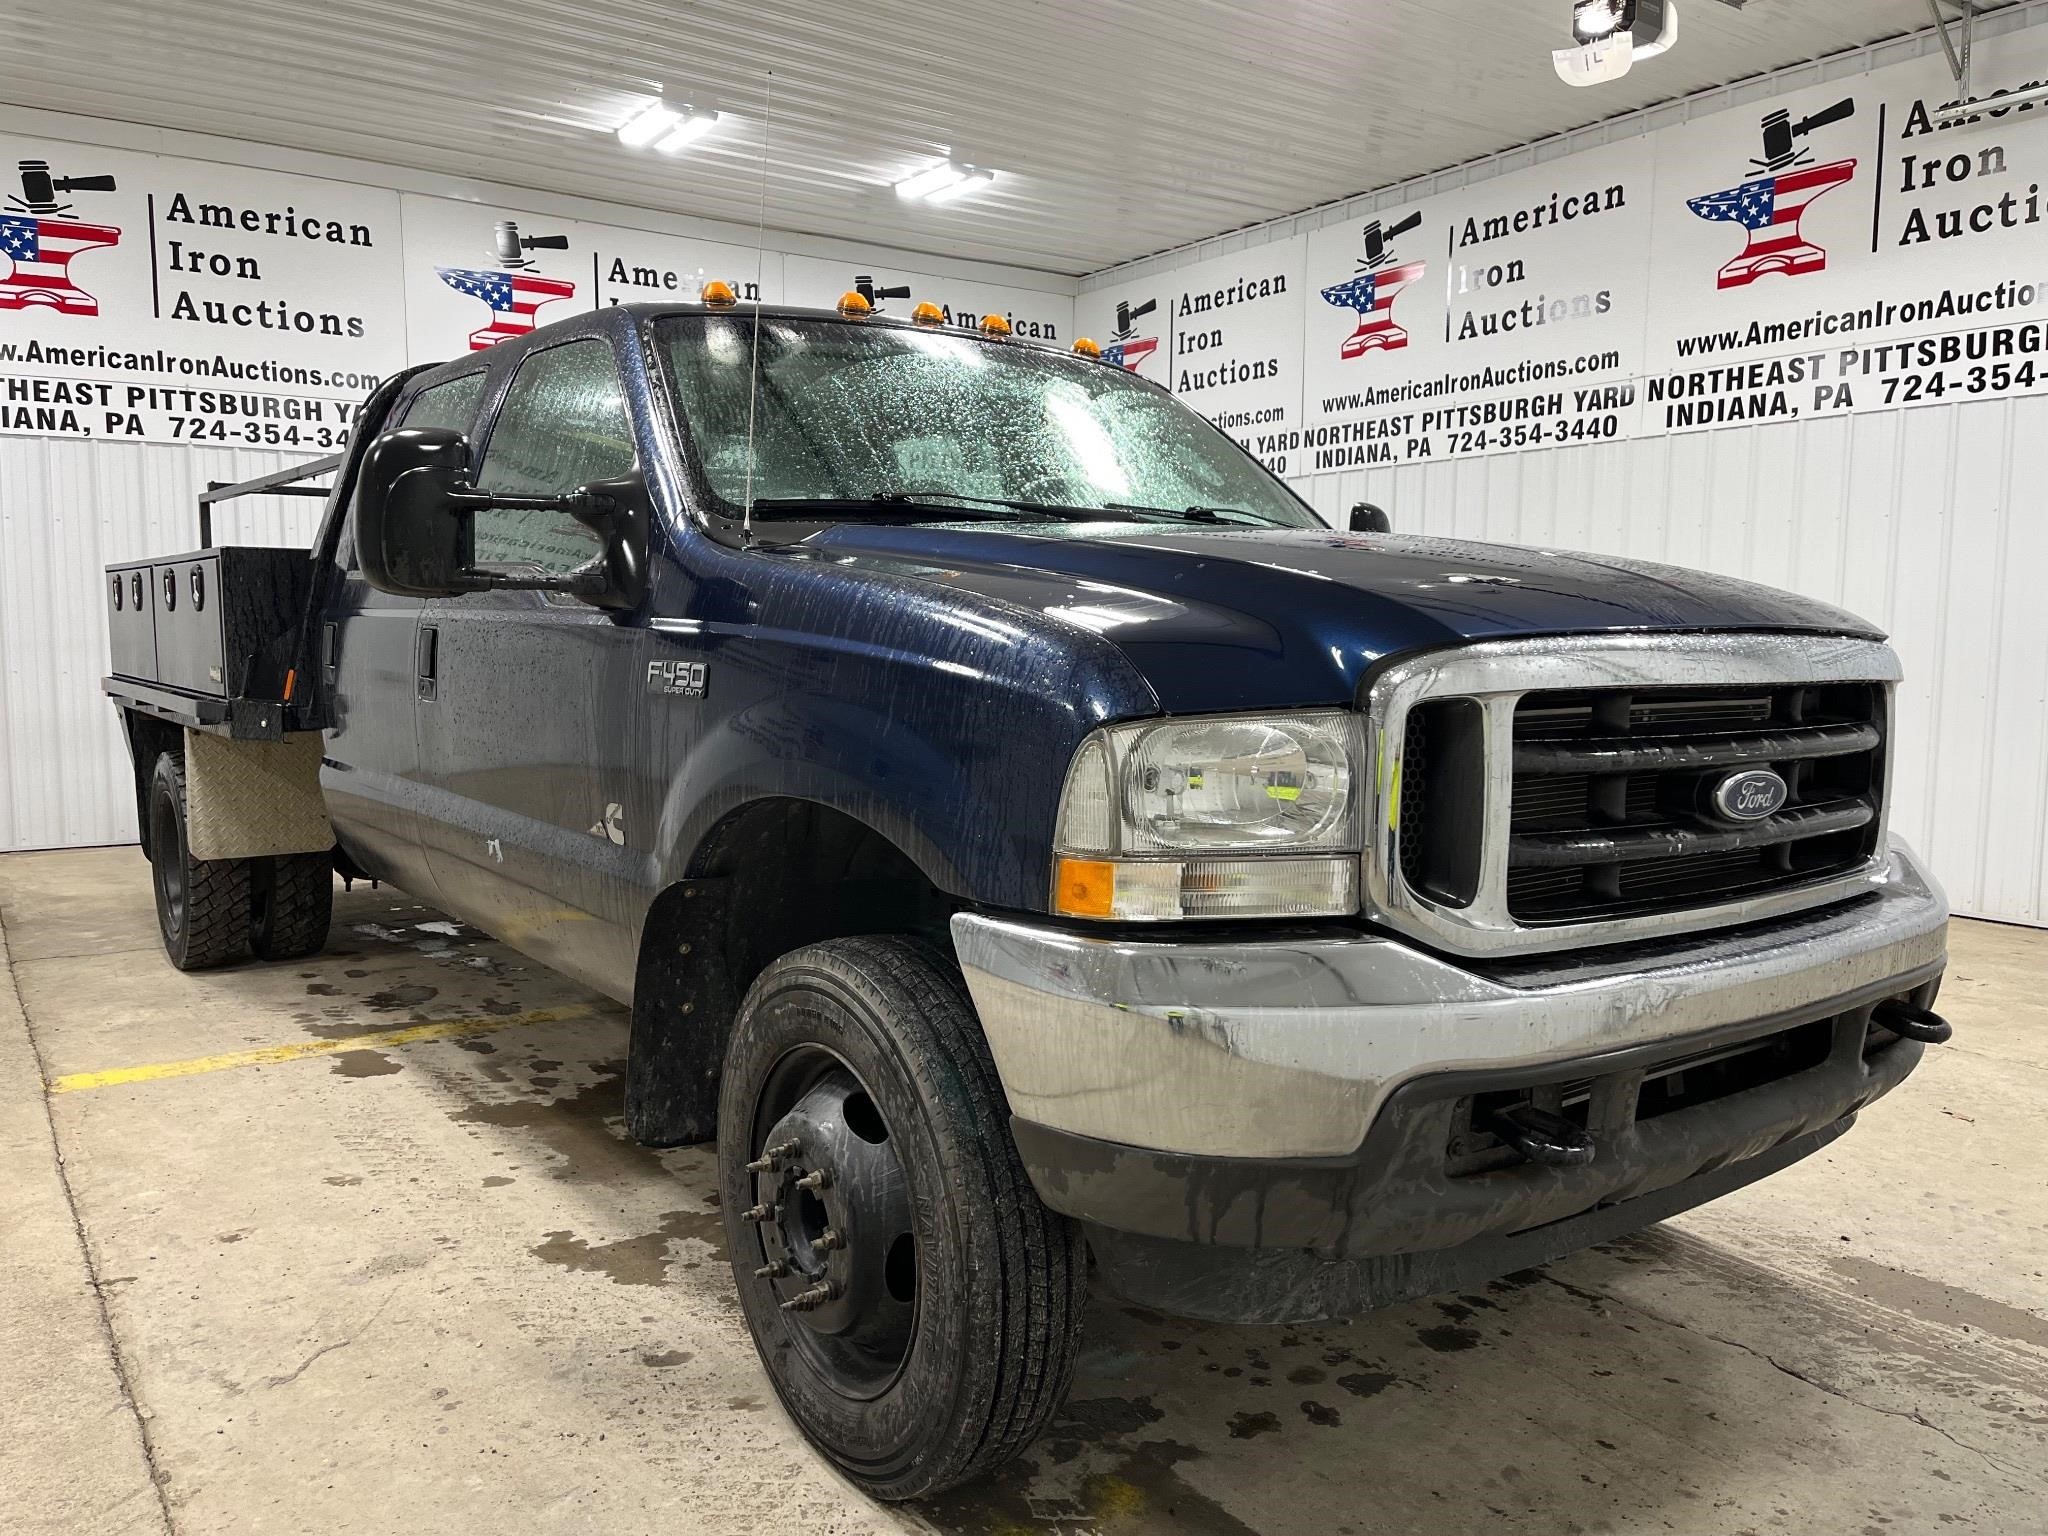 2004 Ford F450 Truck- Titled